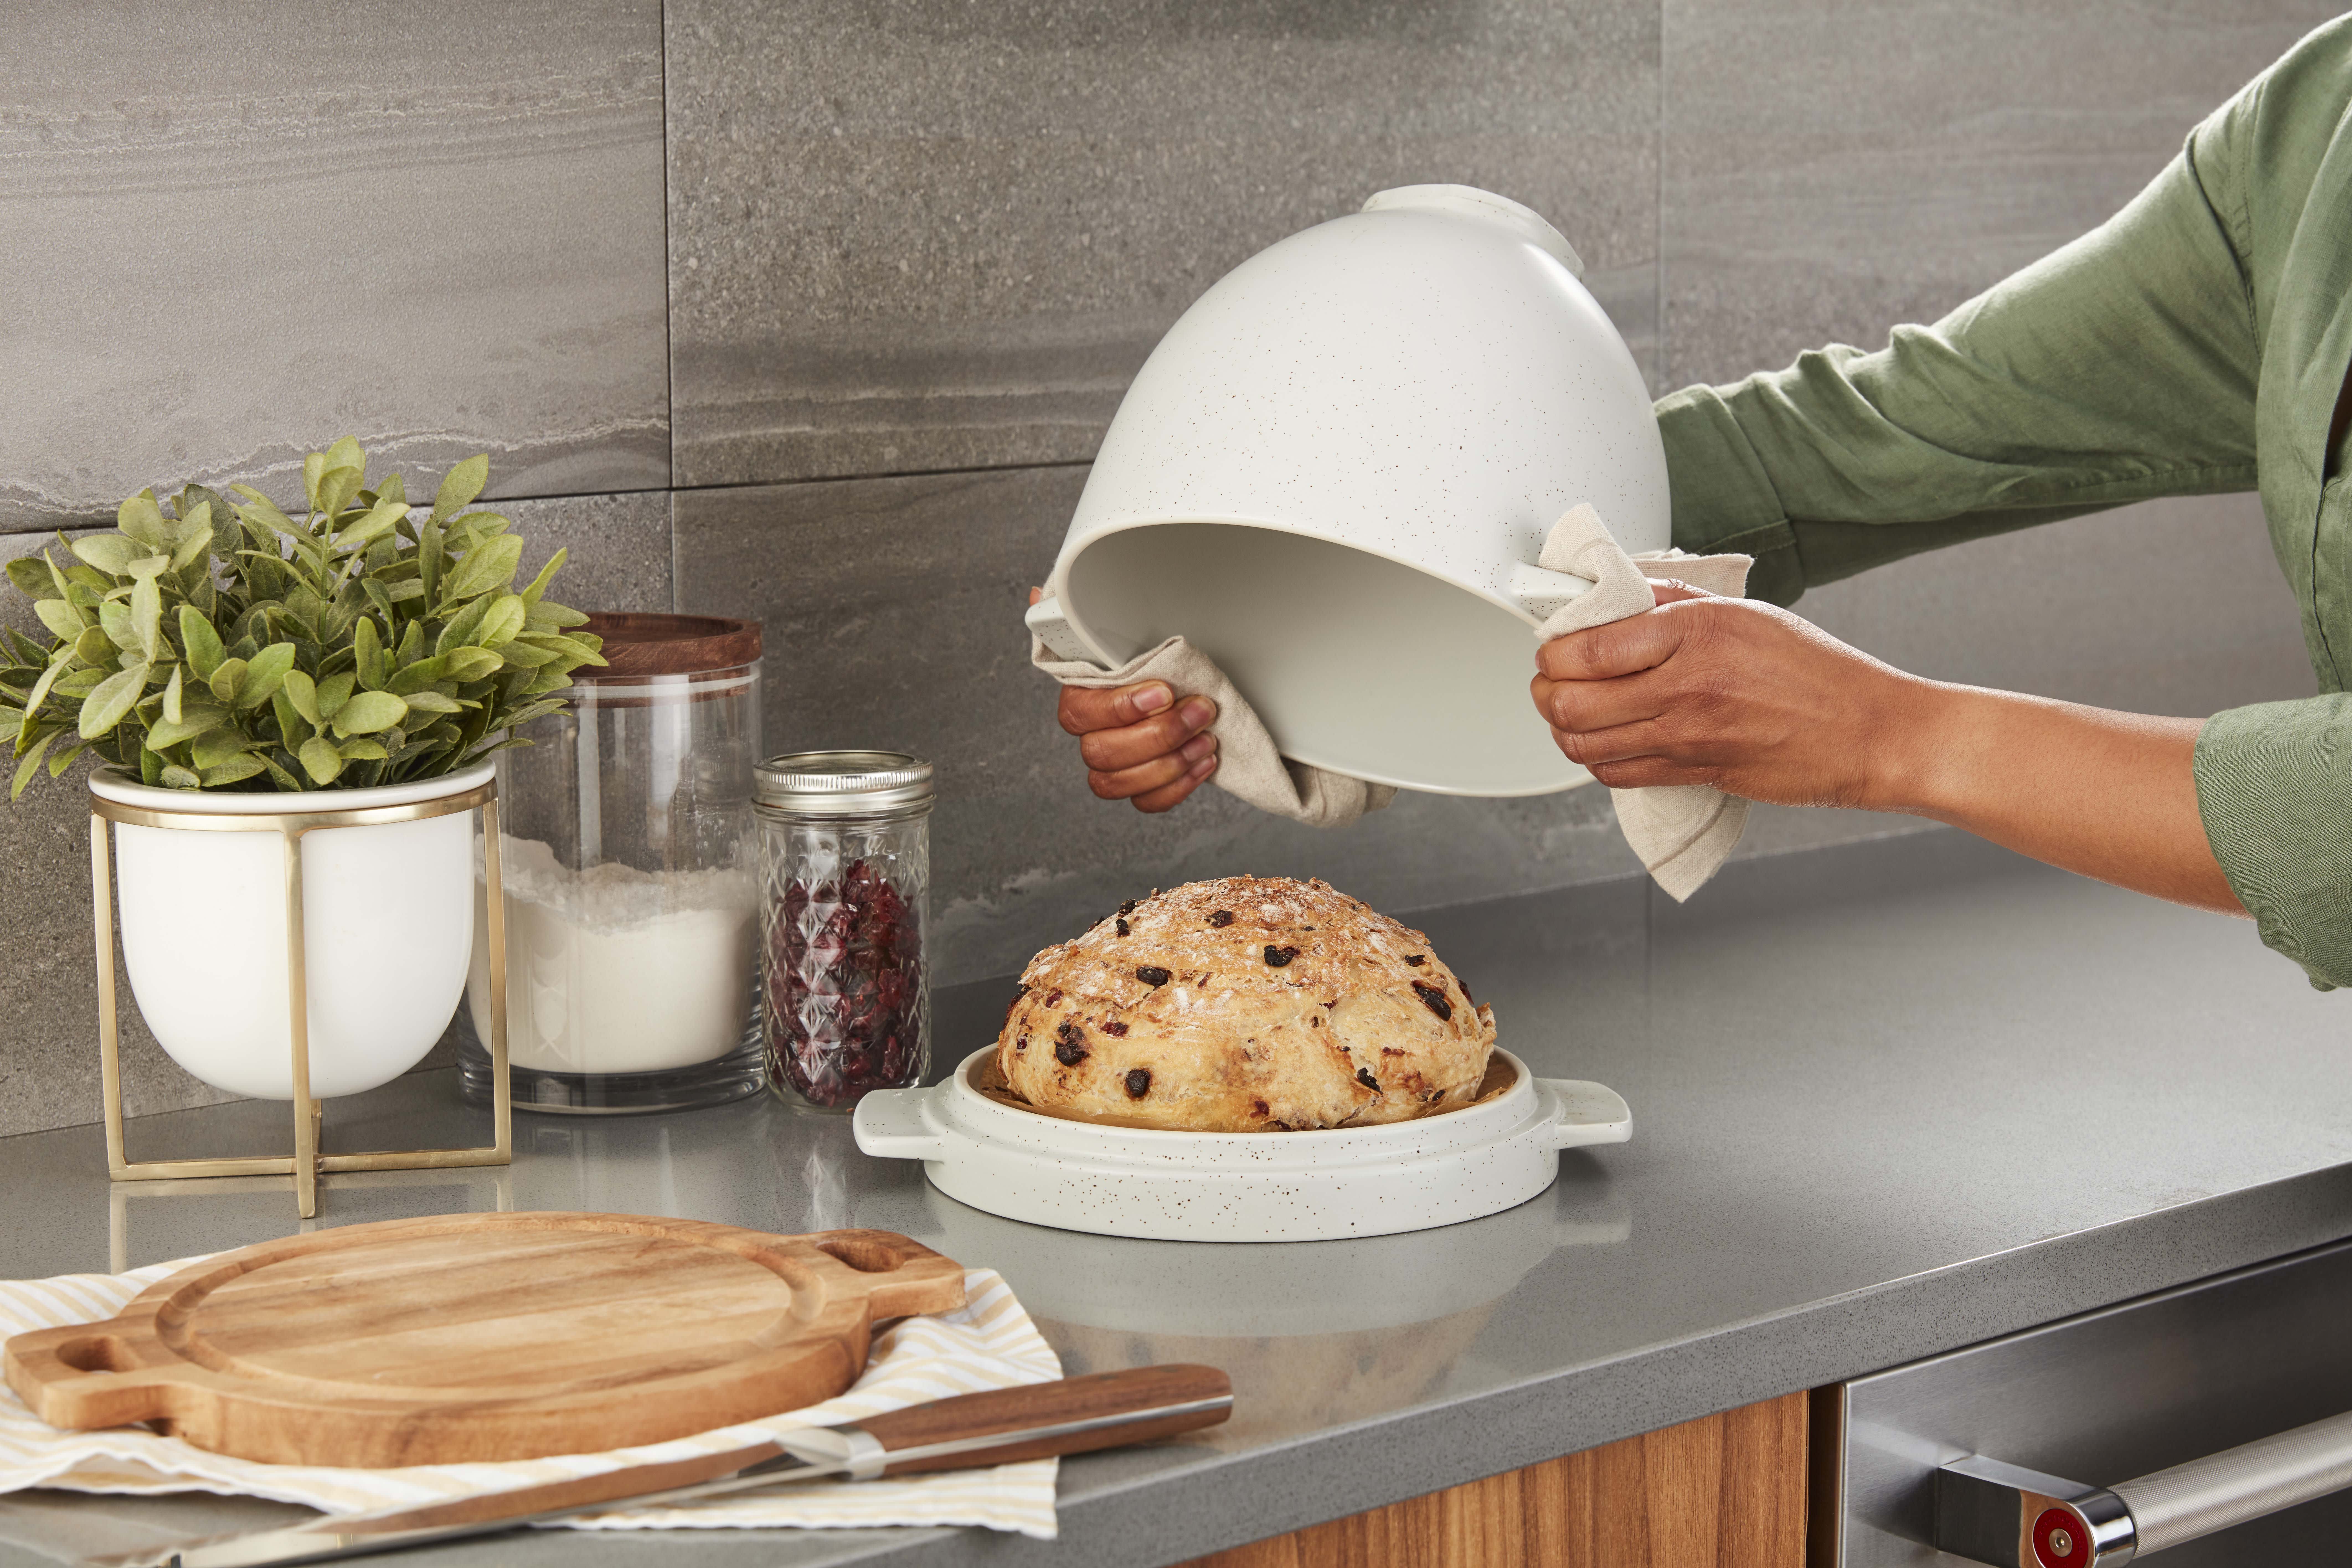 KitchenAid Launches Bread Bowl with Lid: August 2021